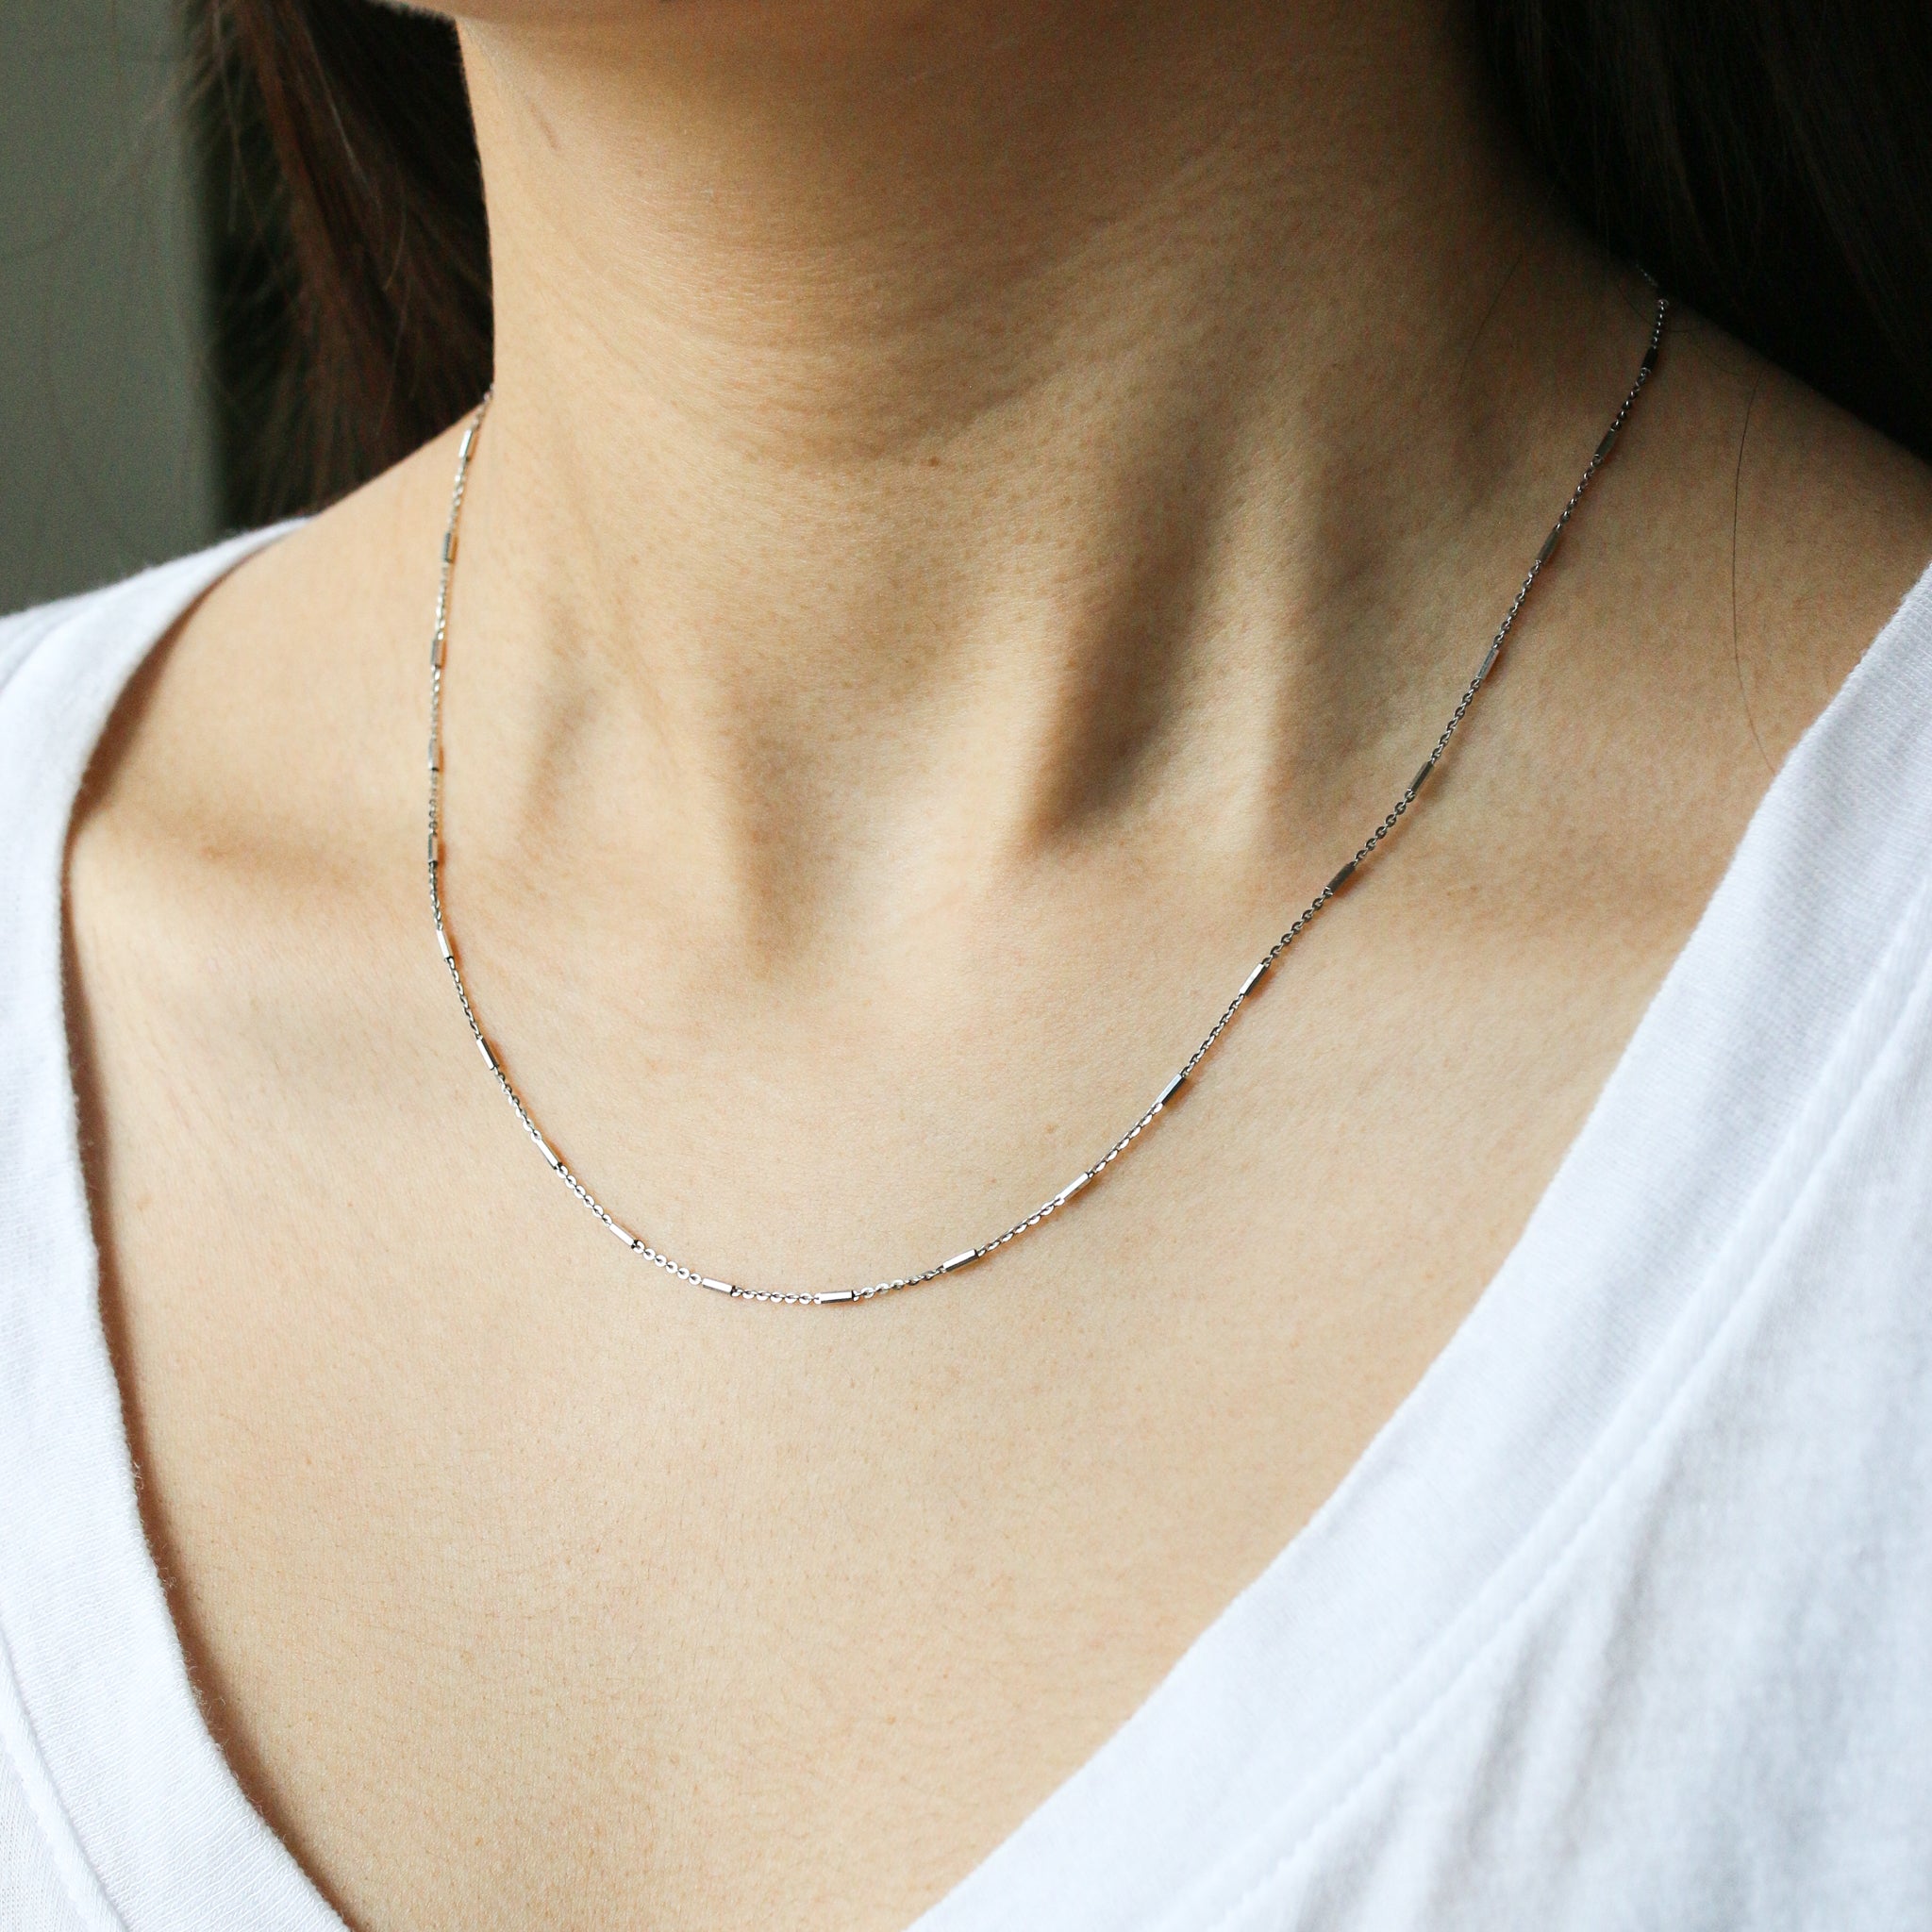 14k Solid White Gold Bead Chain